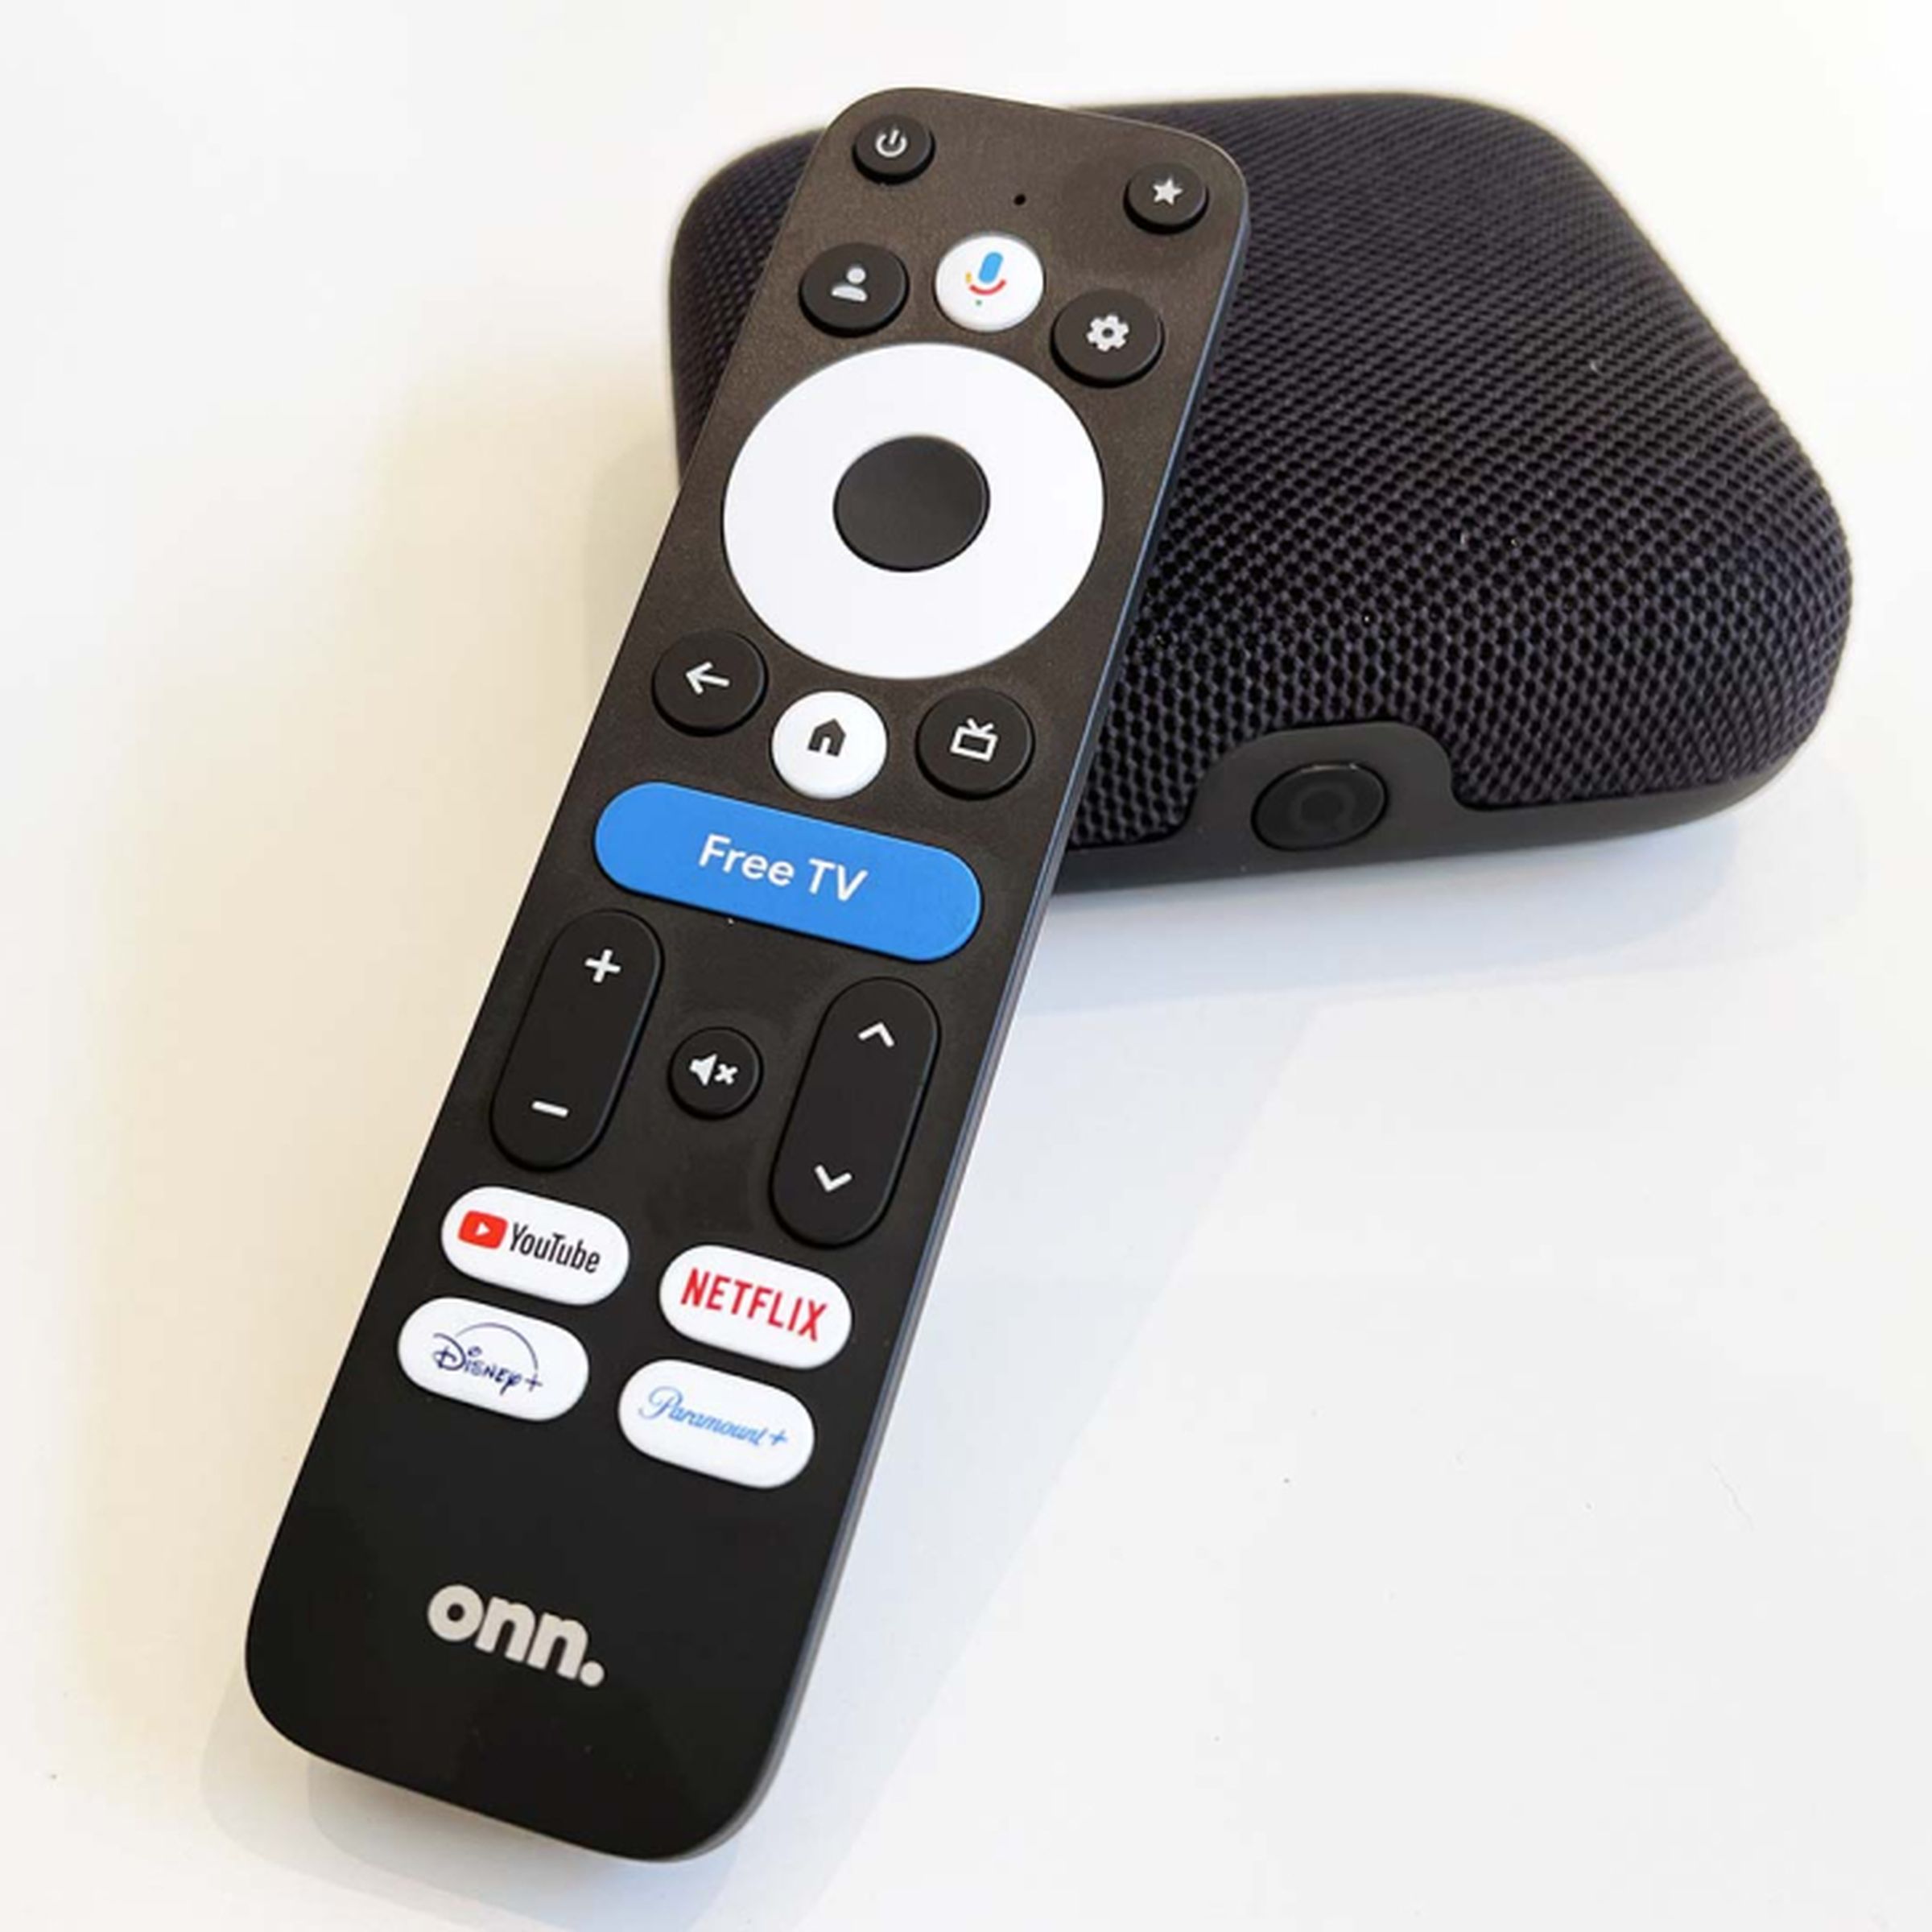 onn branded remote sitting on to of a square streaming box with a mesh fabric